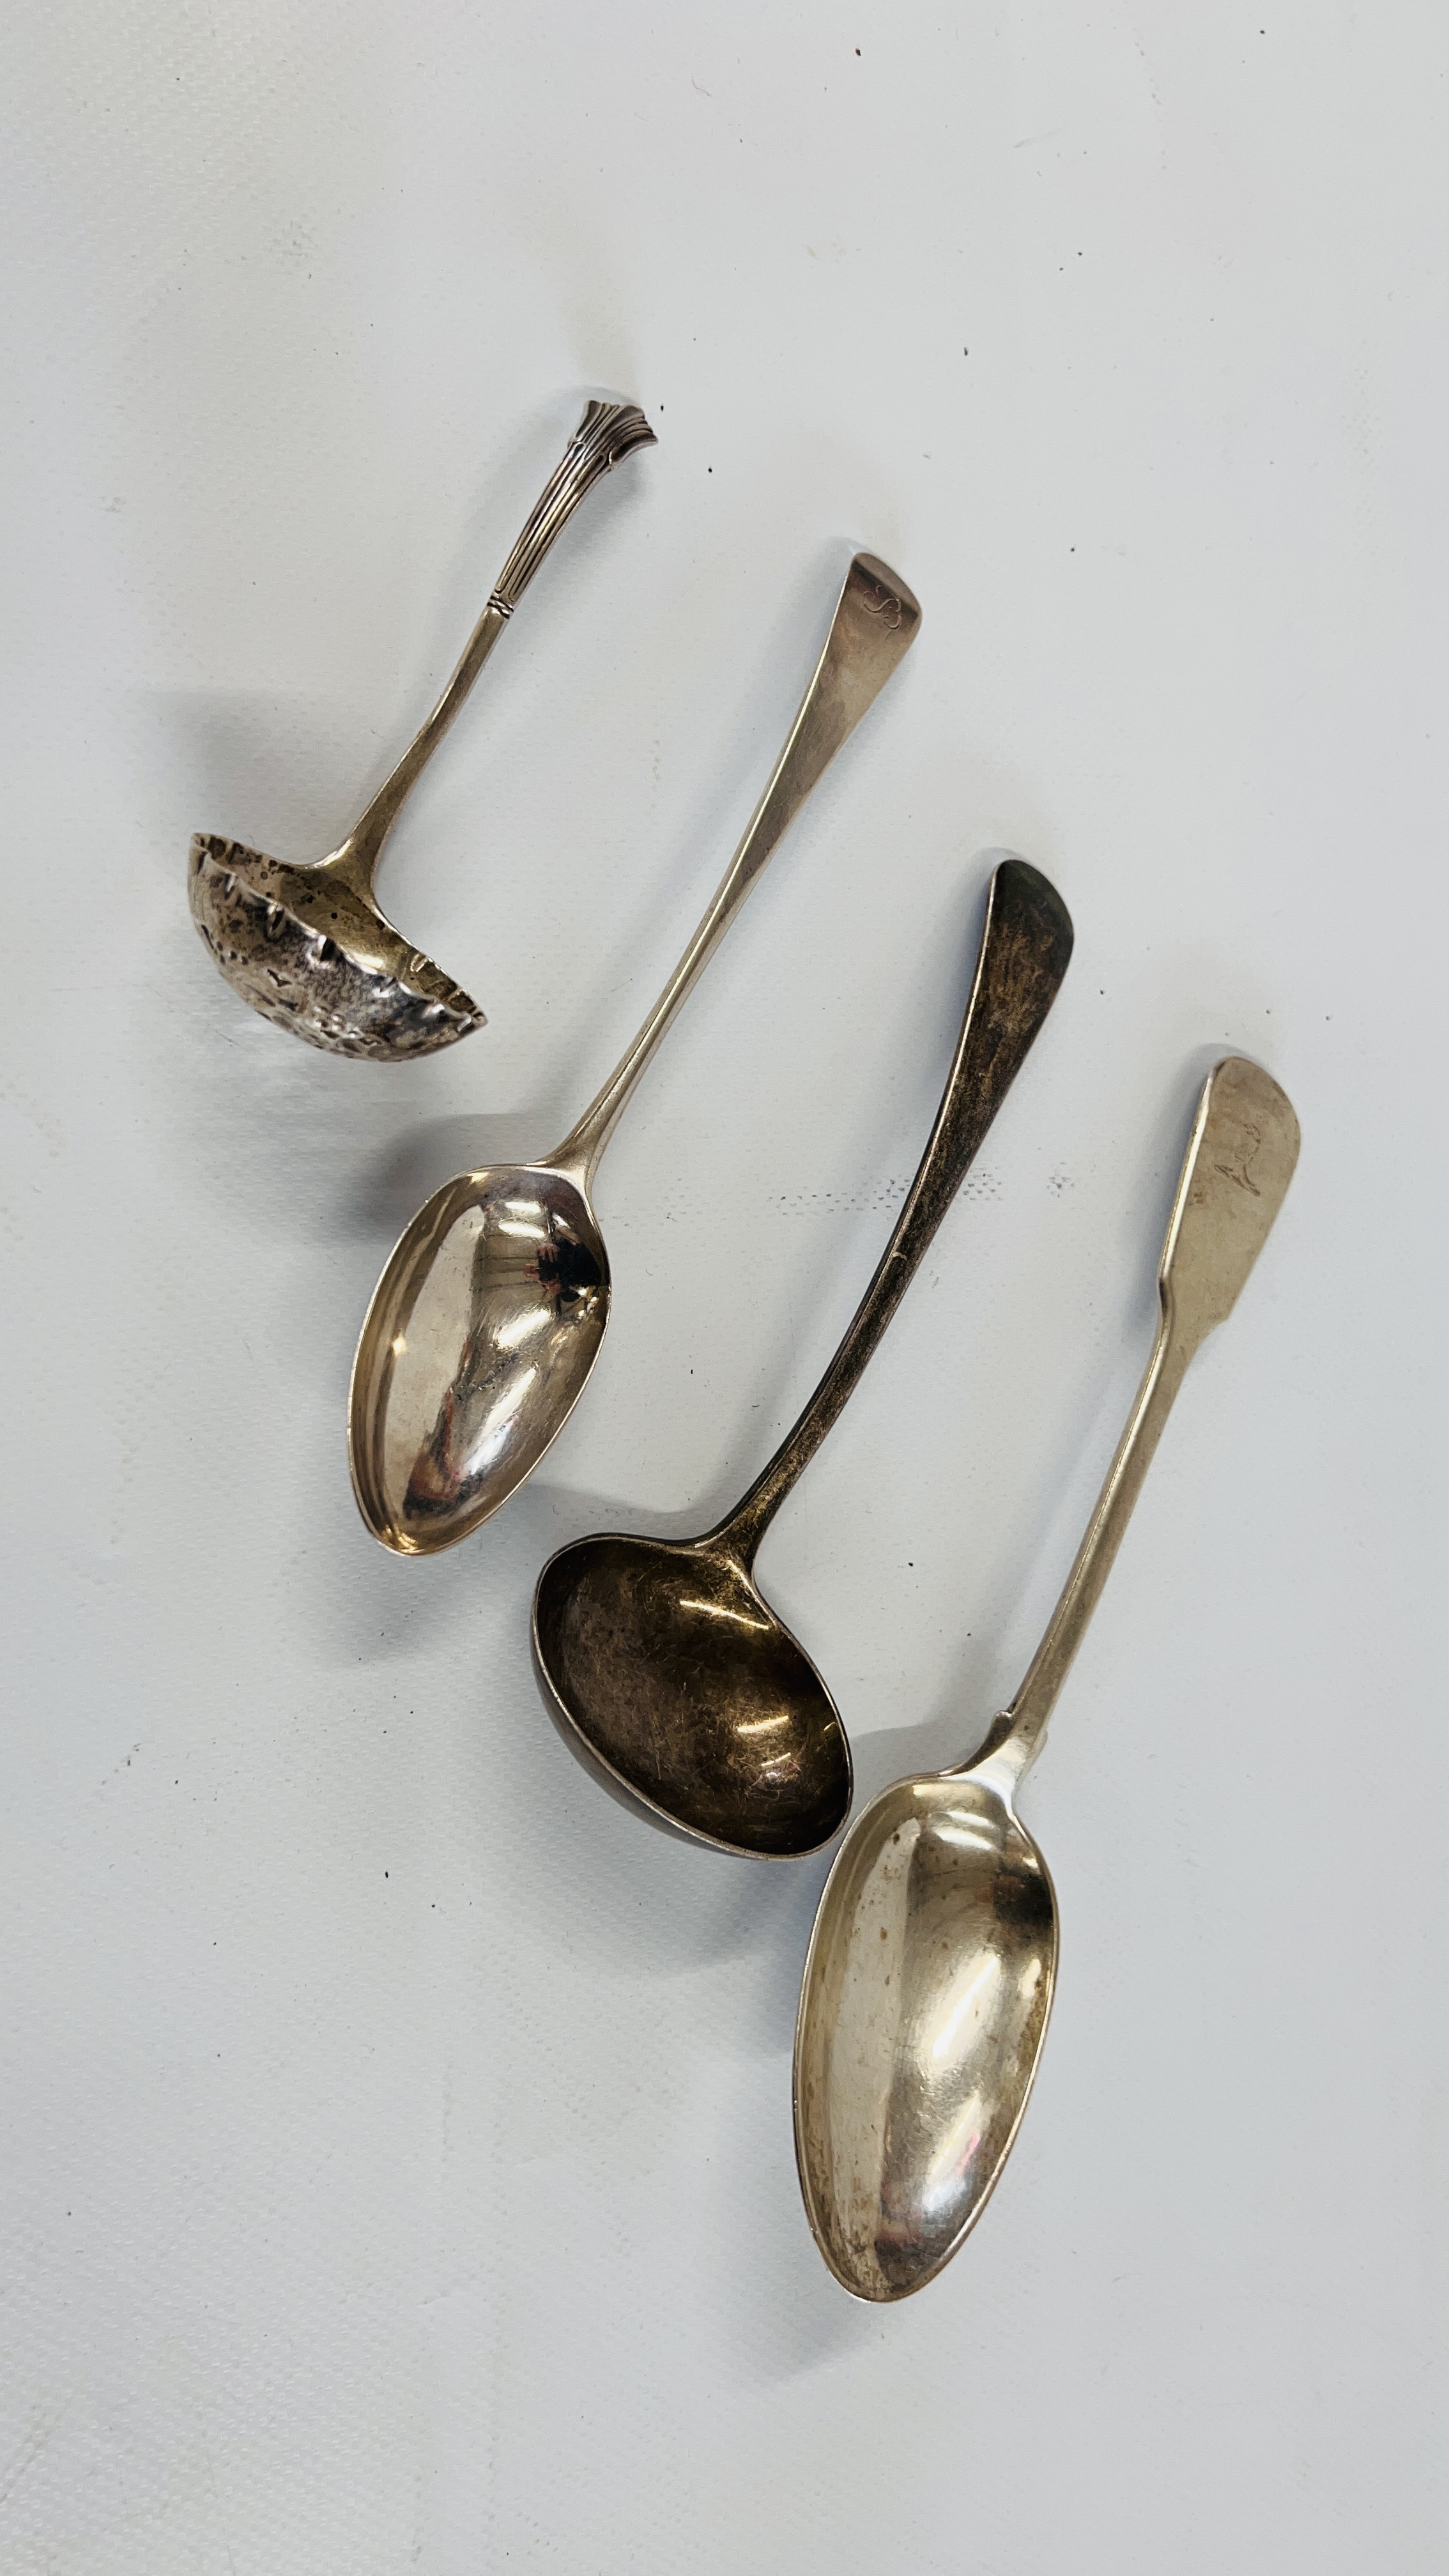 A SILVER DESSERT SPOON, PETER BATEMAN, LONDON 1796, ALONG WITH A GEORGE III SILVER SERVING SPOON,